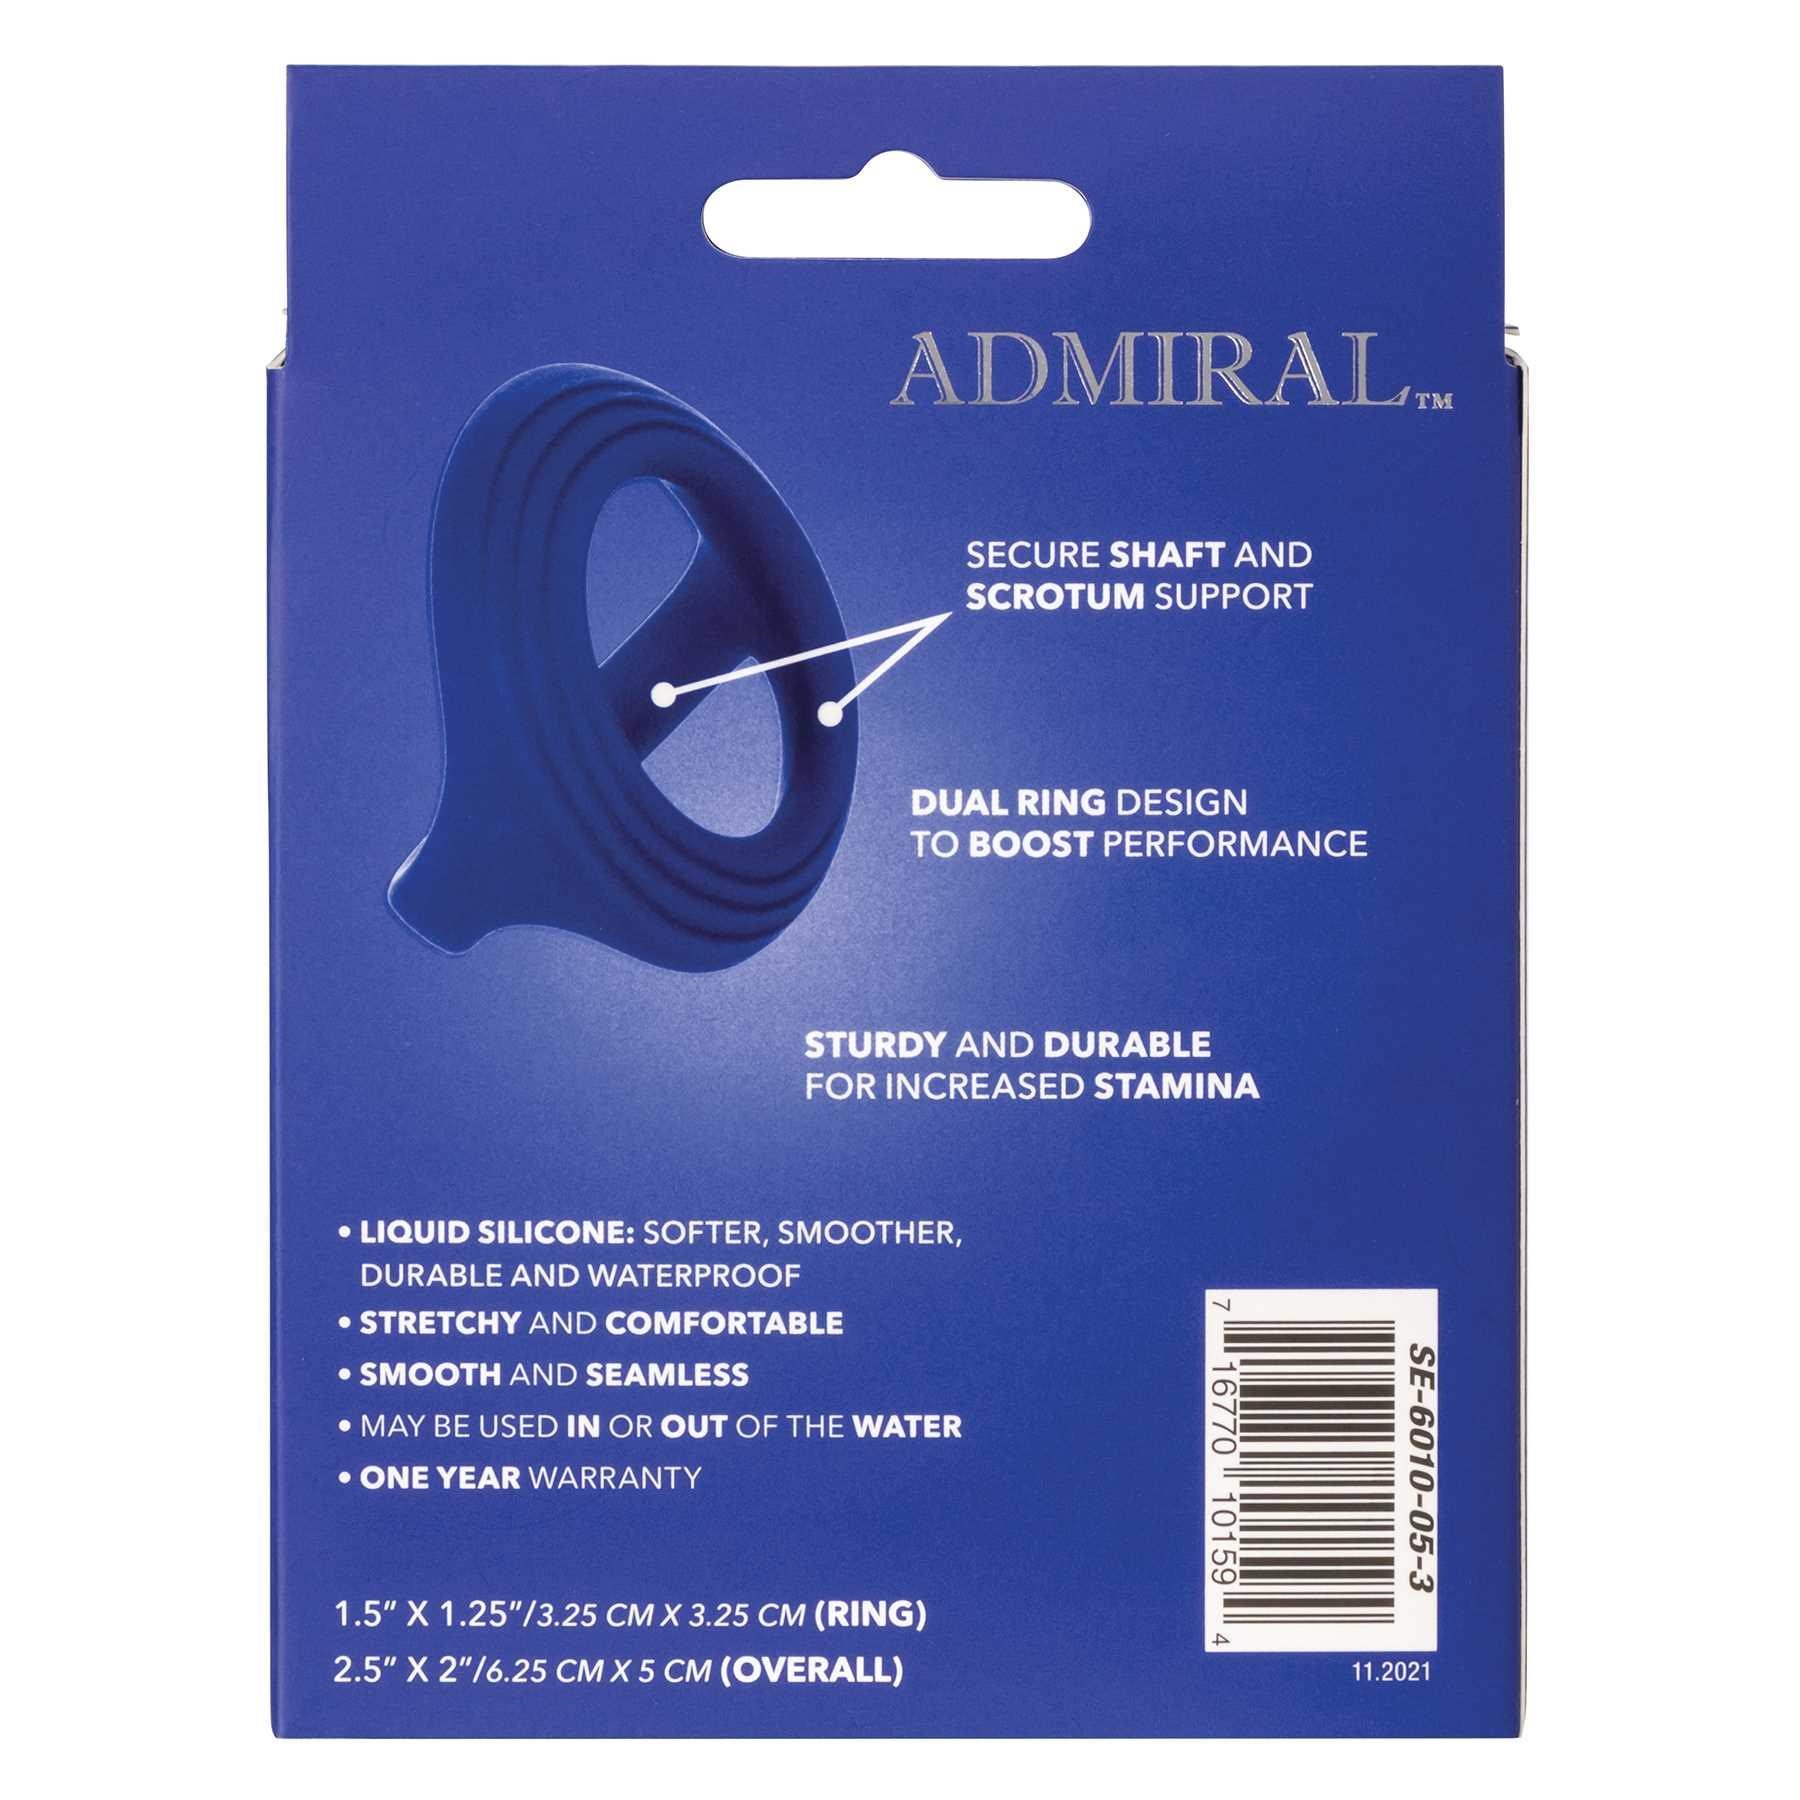 Admiral Cock & Ball Dual Ring specifications